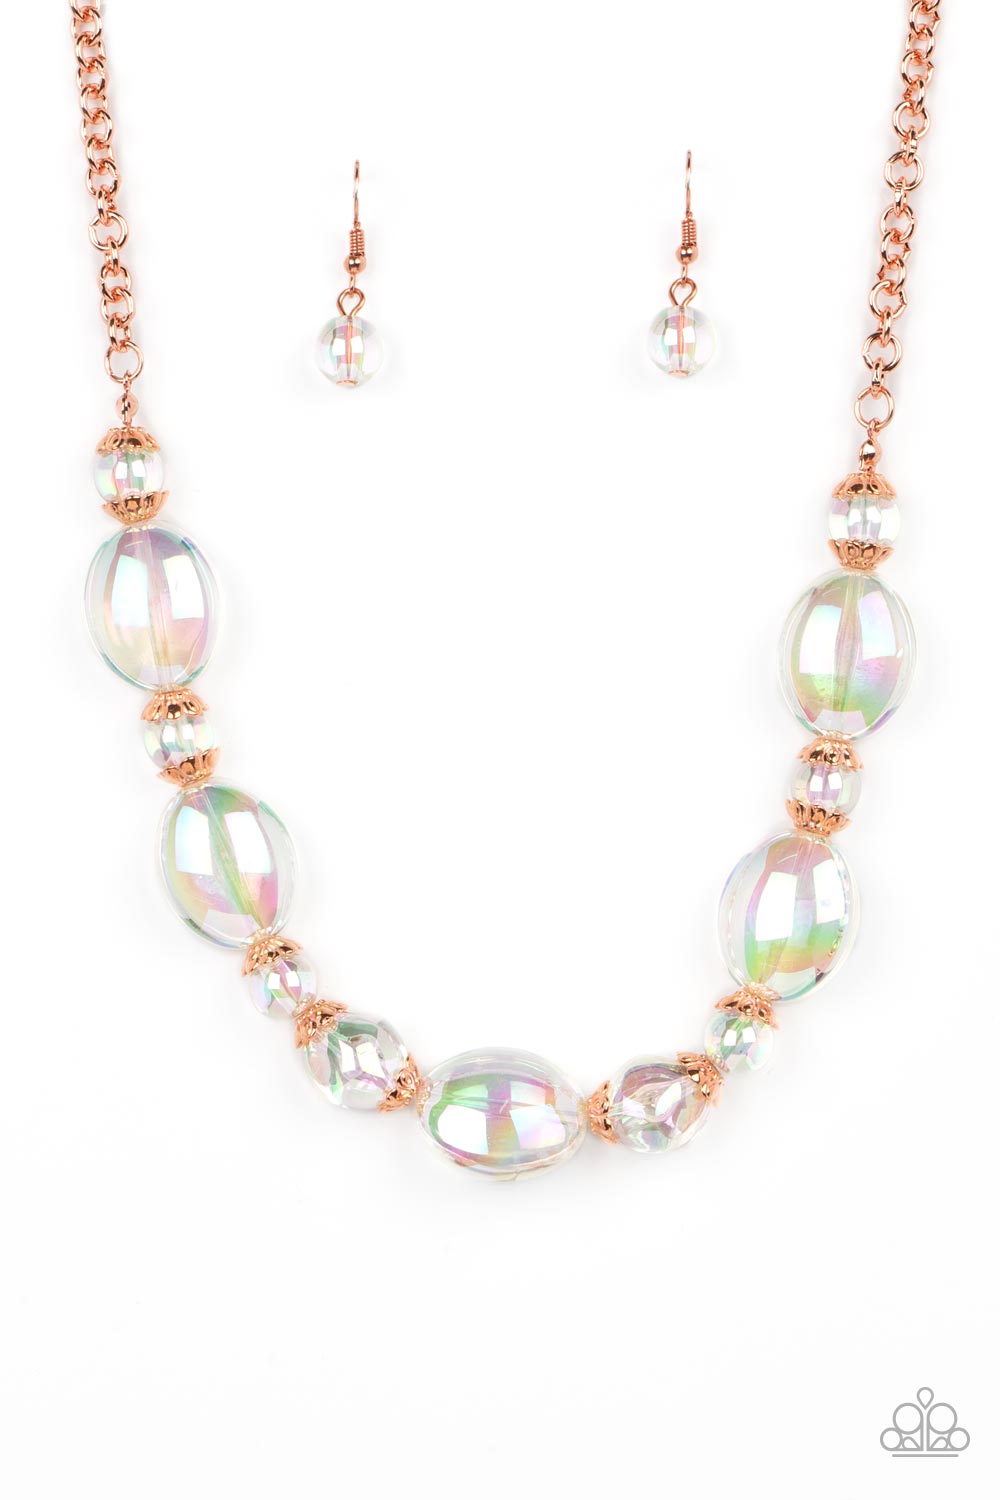 Prismatic Magic - Copper Chain/Iridescent Bubbly Beaded Paparazzi Necklace & matching earrings